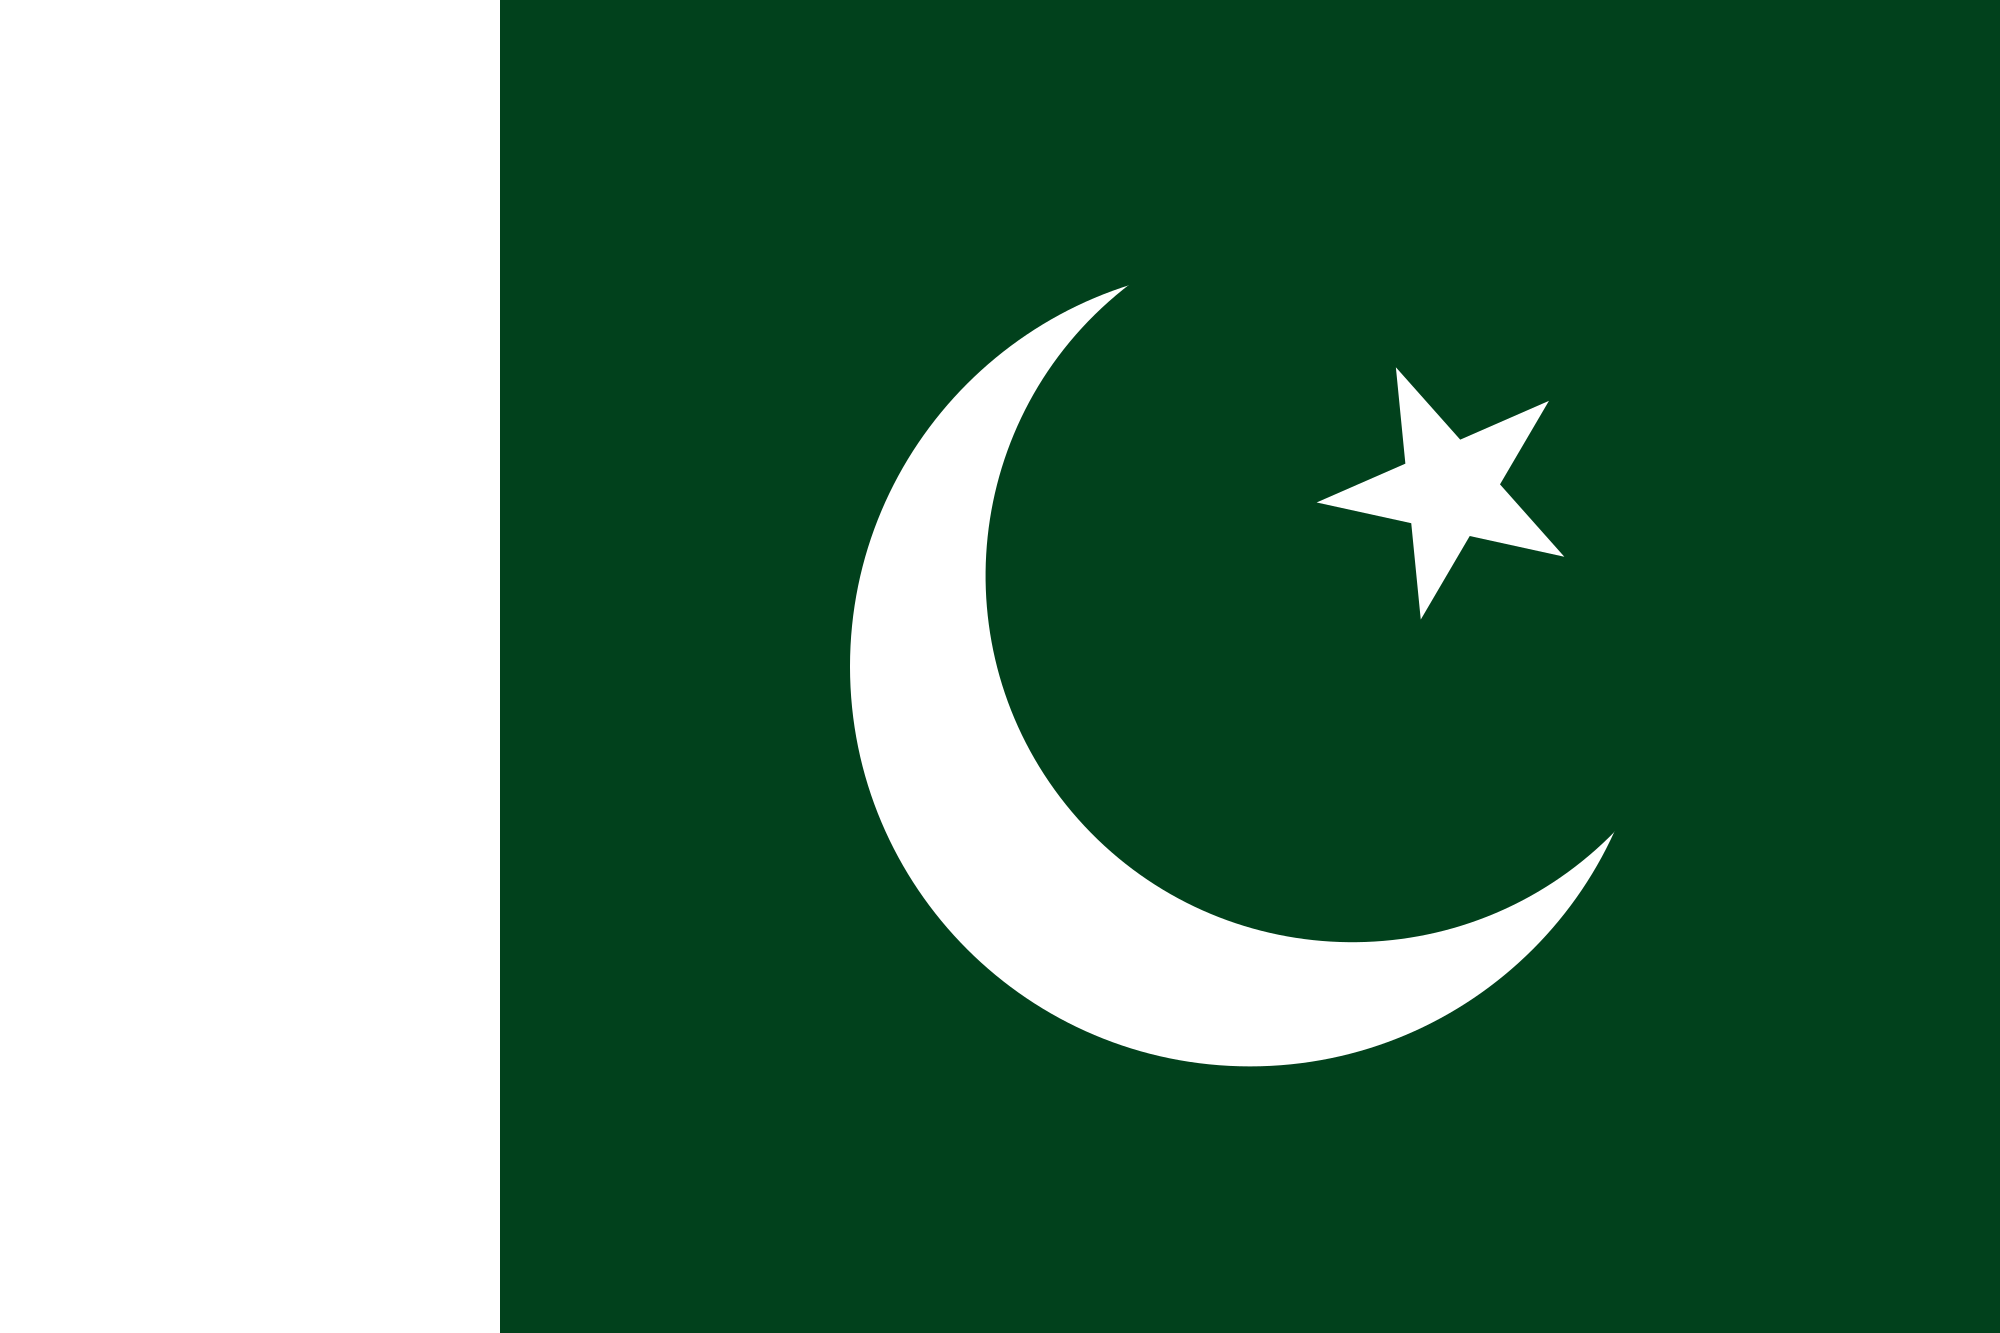 https://upload.wikimedia.org/wikipedia/commons/thumb/3/32/Flag_of_Pakistan.svg/2000px-Flag_of_Pakistan.svg.png